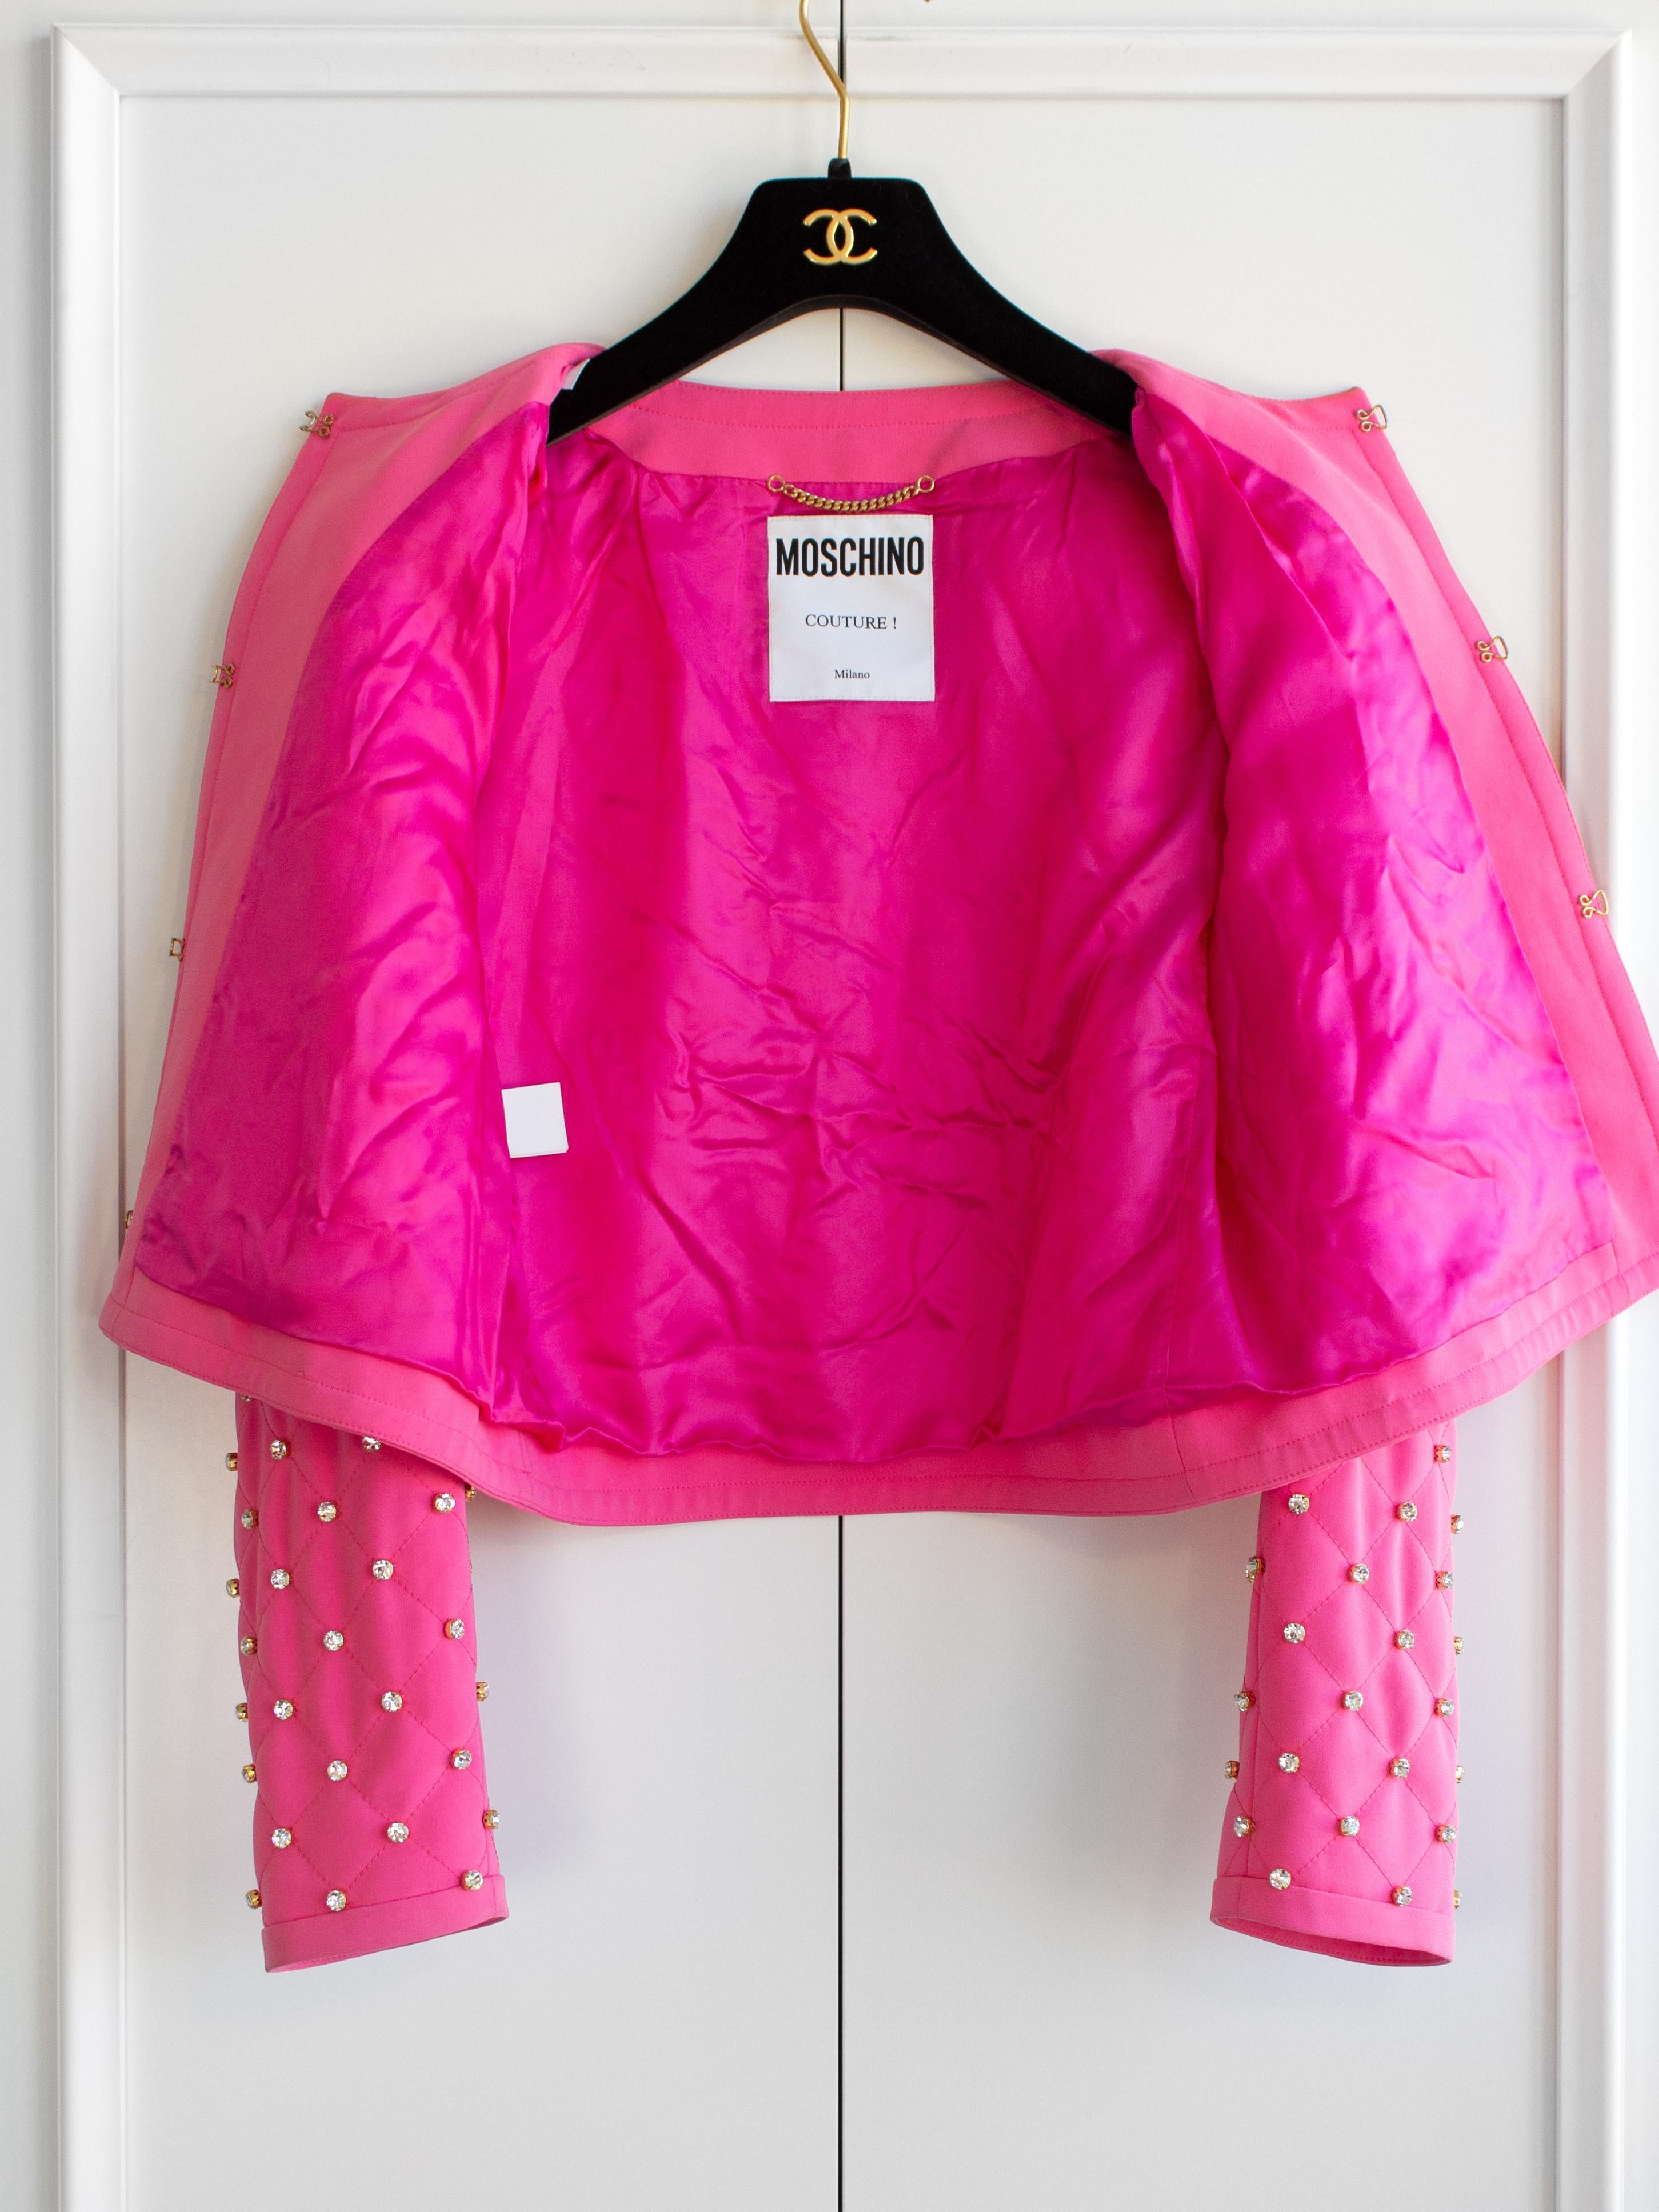 Moschino Couture S/S 2015 Barbie Crystal Embellished Rhinestone Pink Jacket For Sale 10